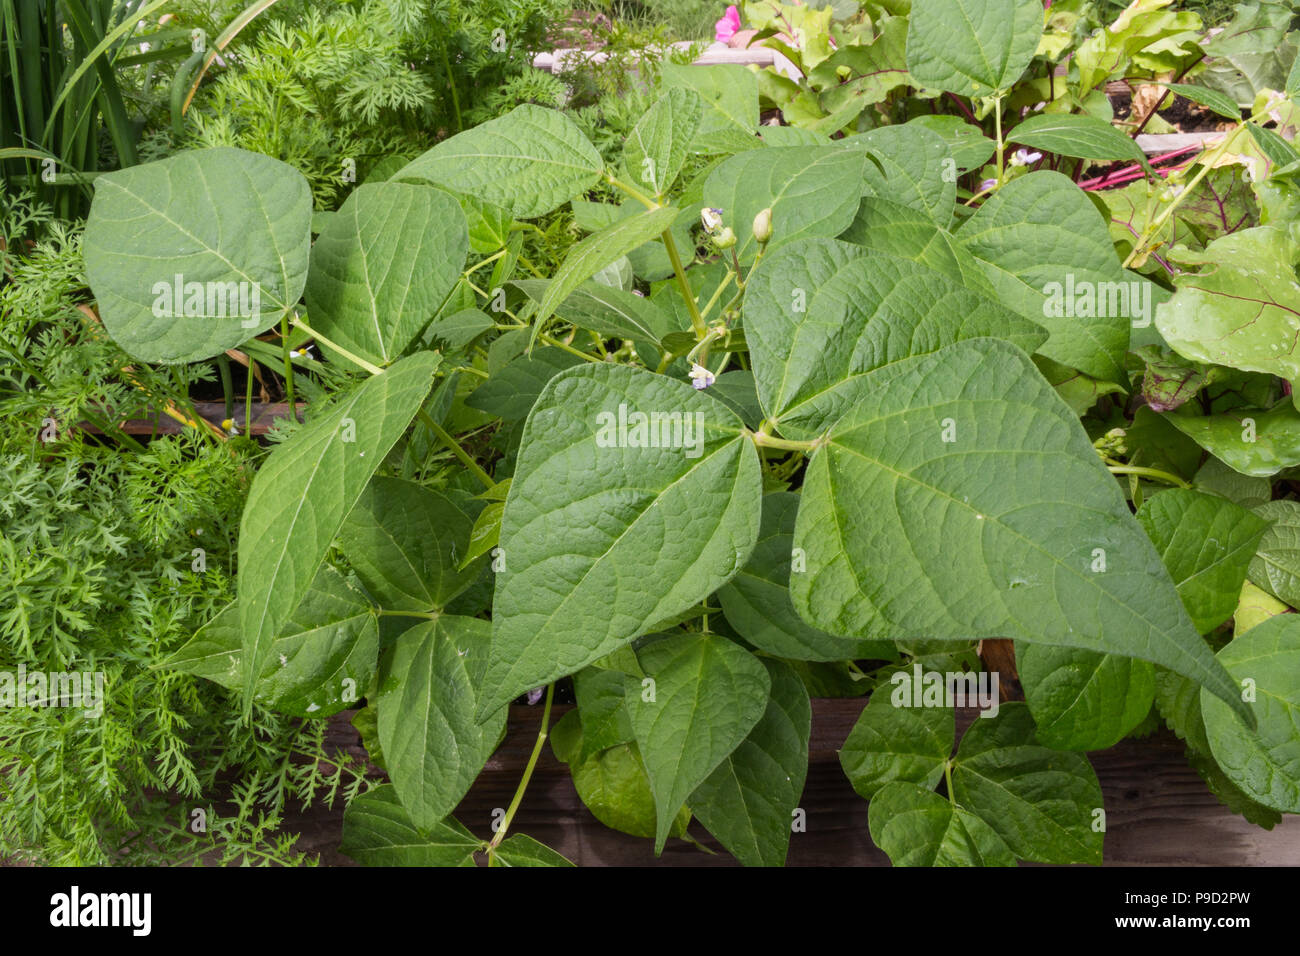 Wax beans, carrots, beets and chives growing in a raised bed garden. Stock Photo